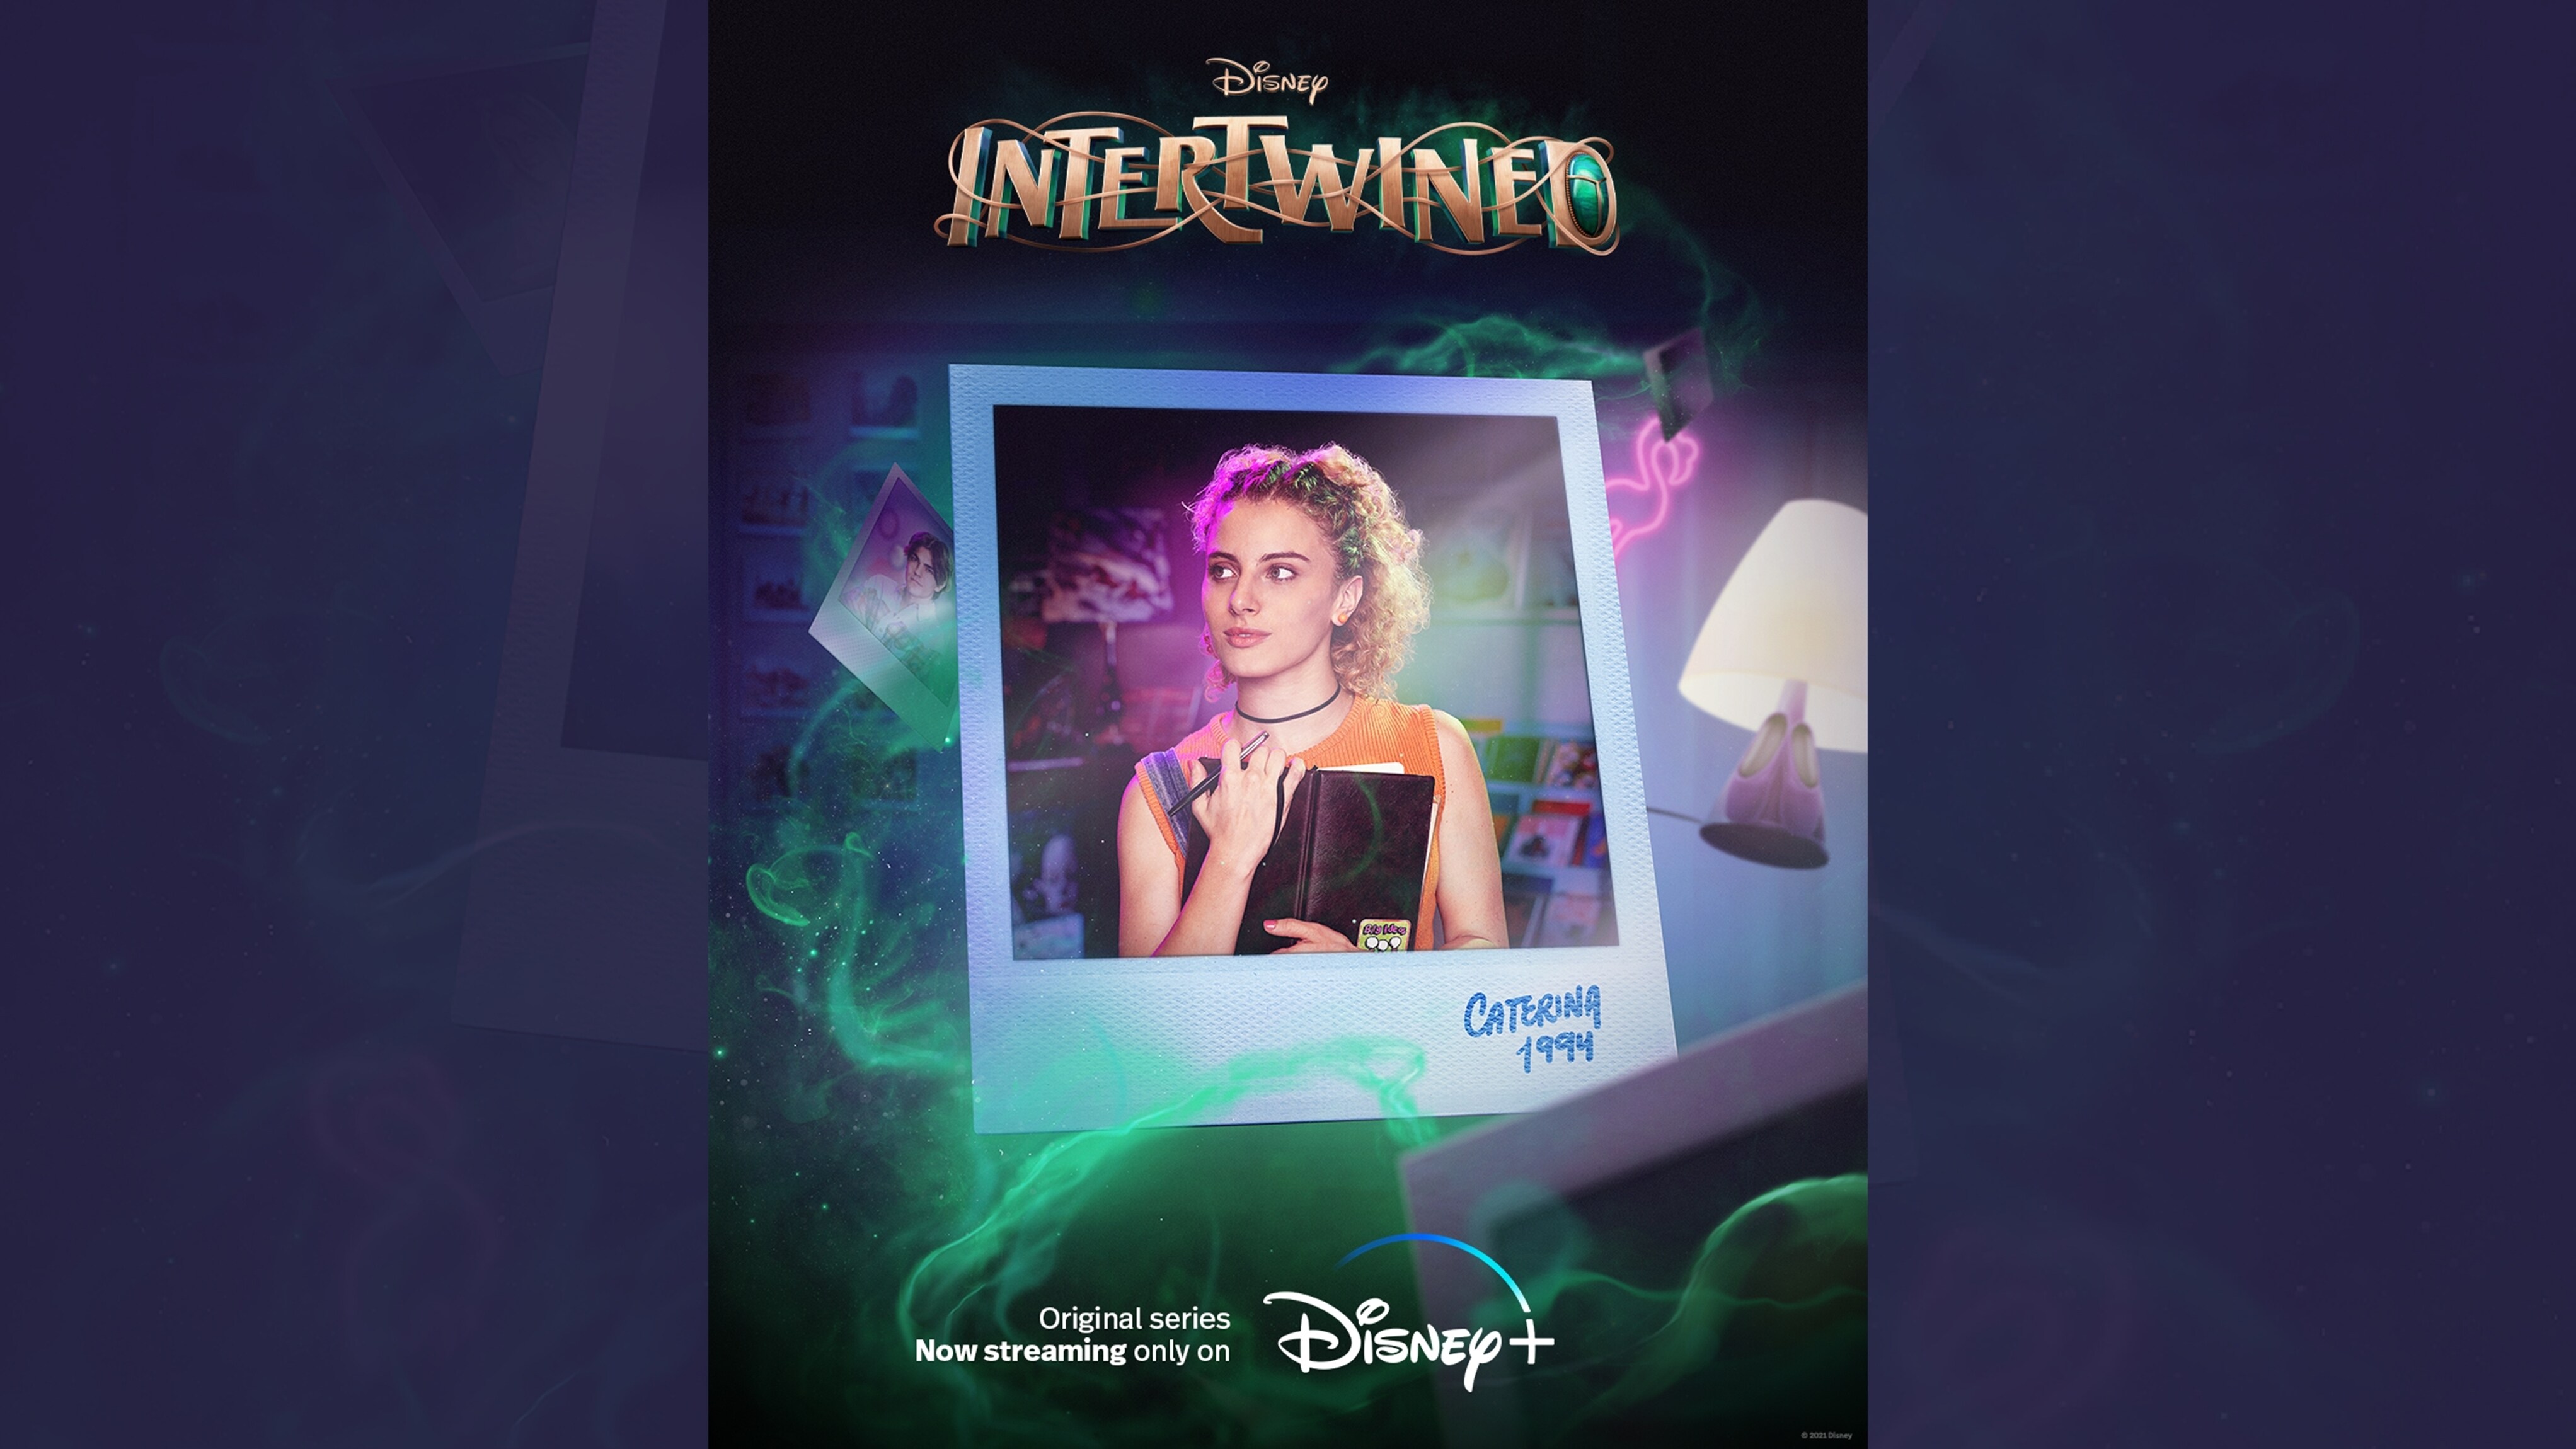 Disney | Intertwined | Caterina (1994) | Original series now streaming only on Disney+